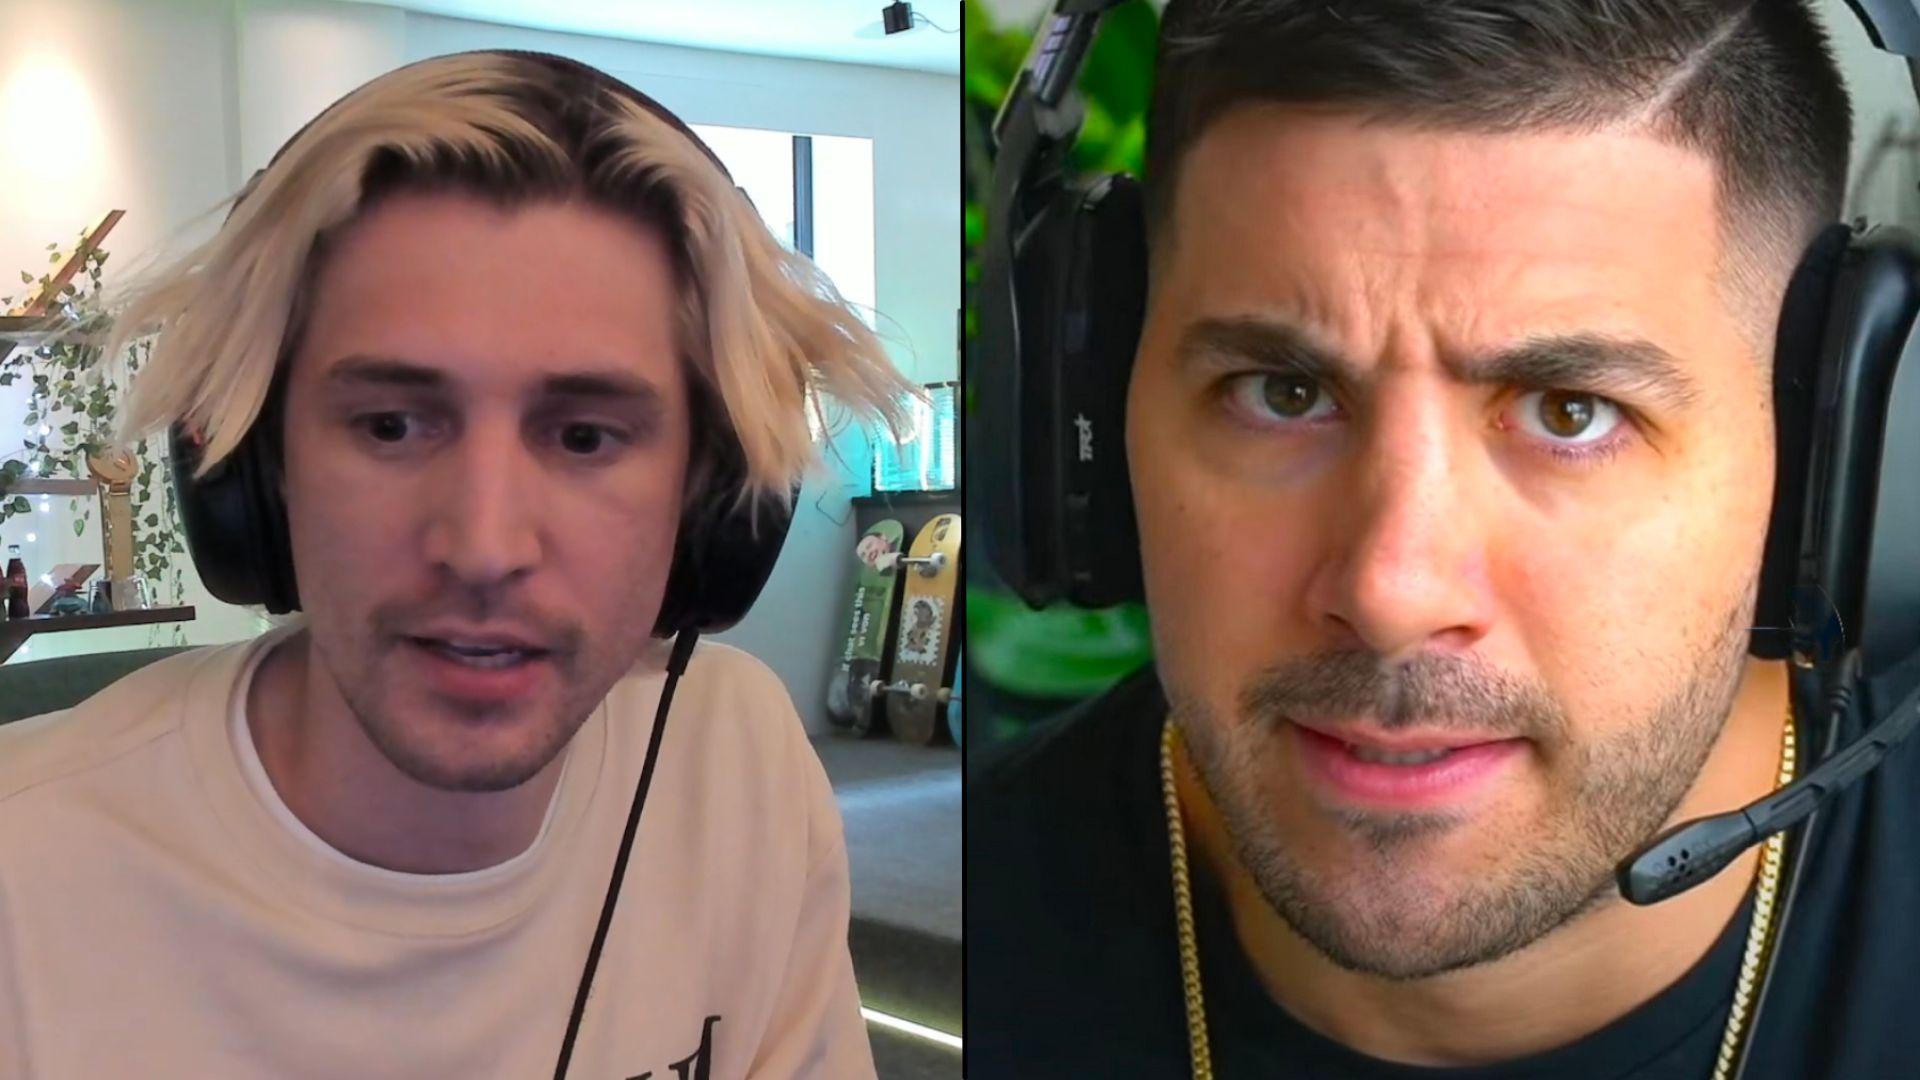 xQc and Nickmercs side by side on stream looking at camera and talking